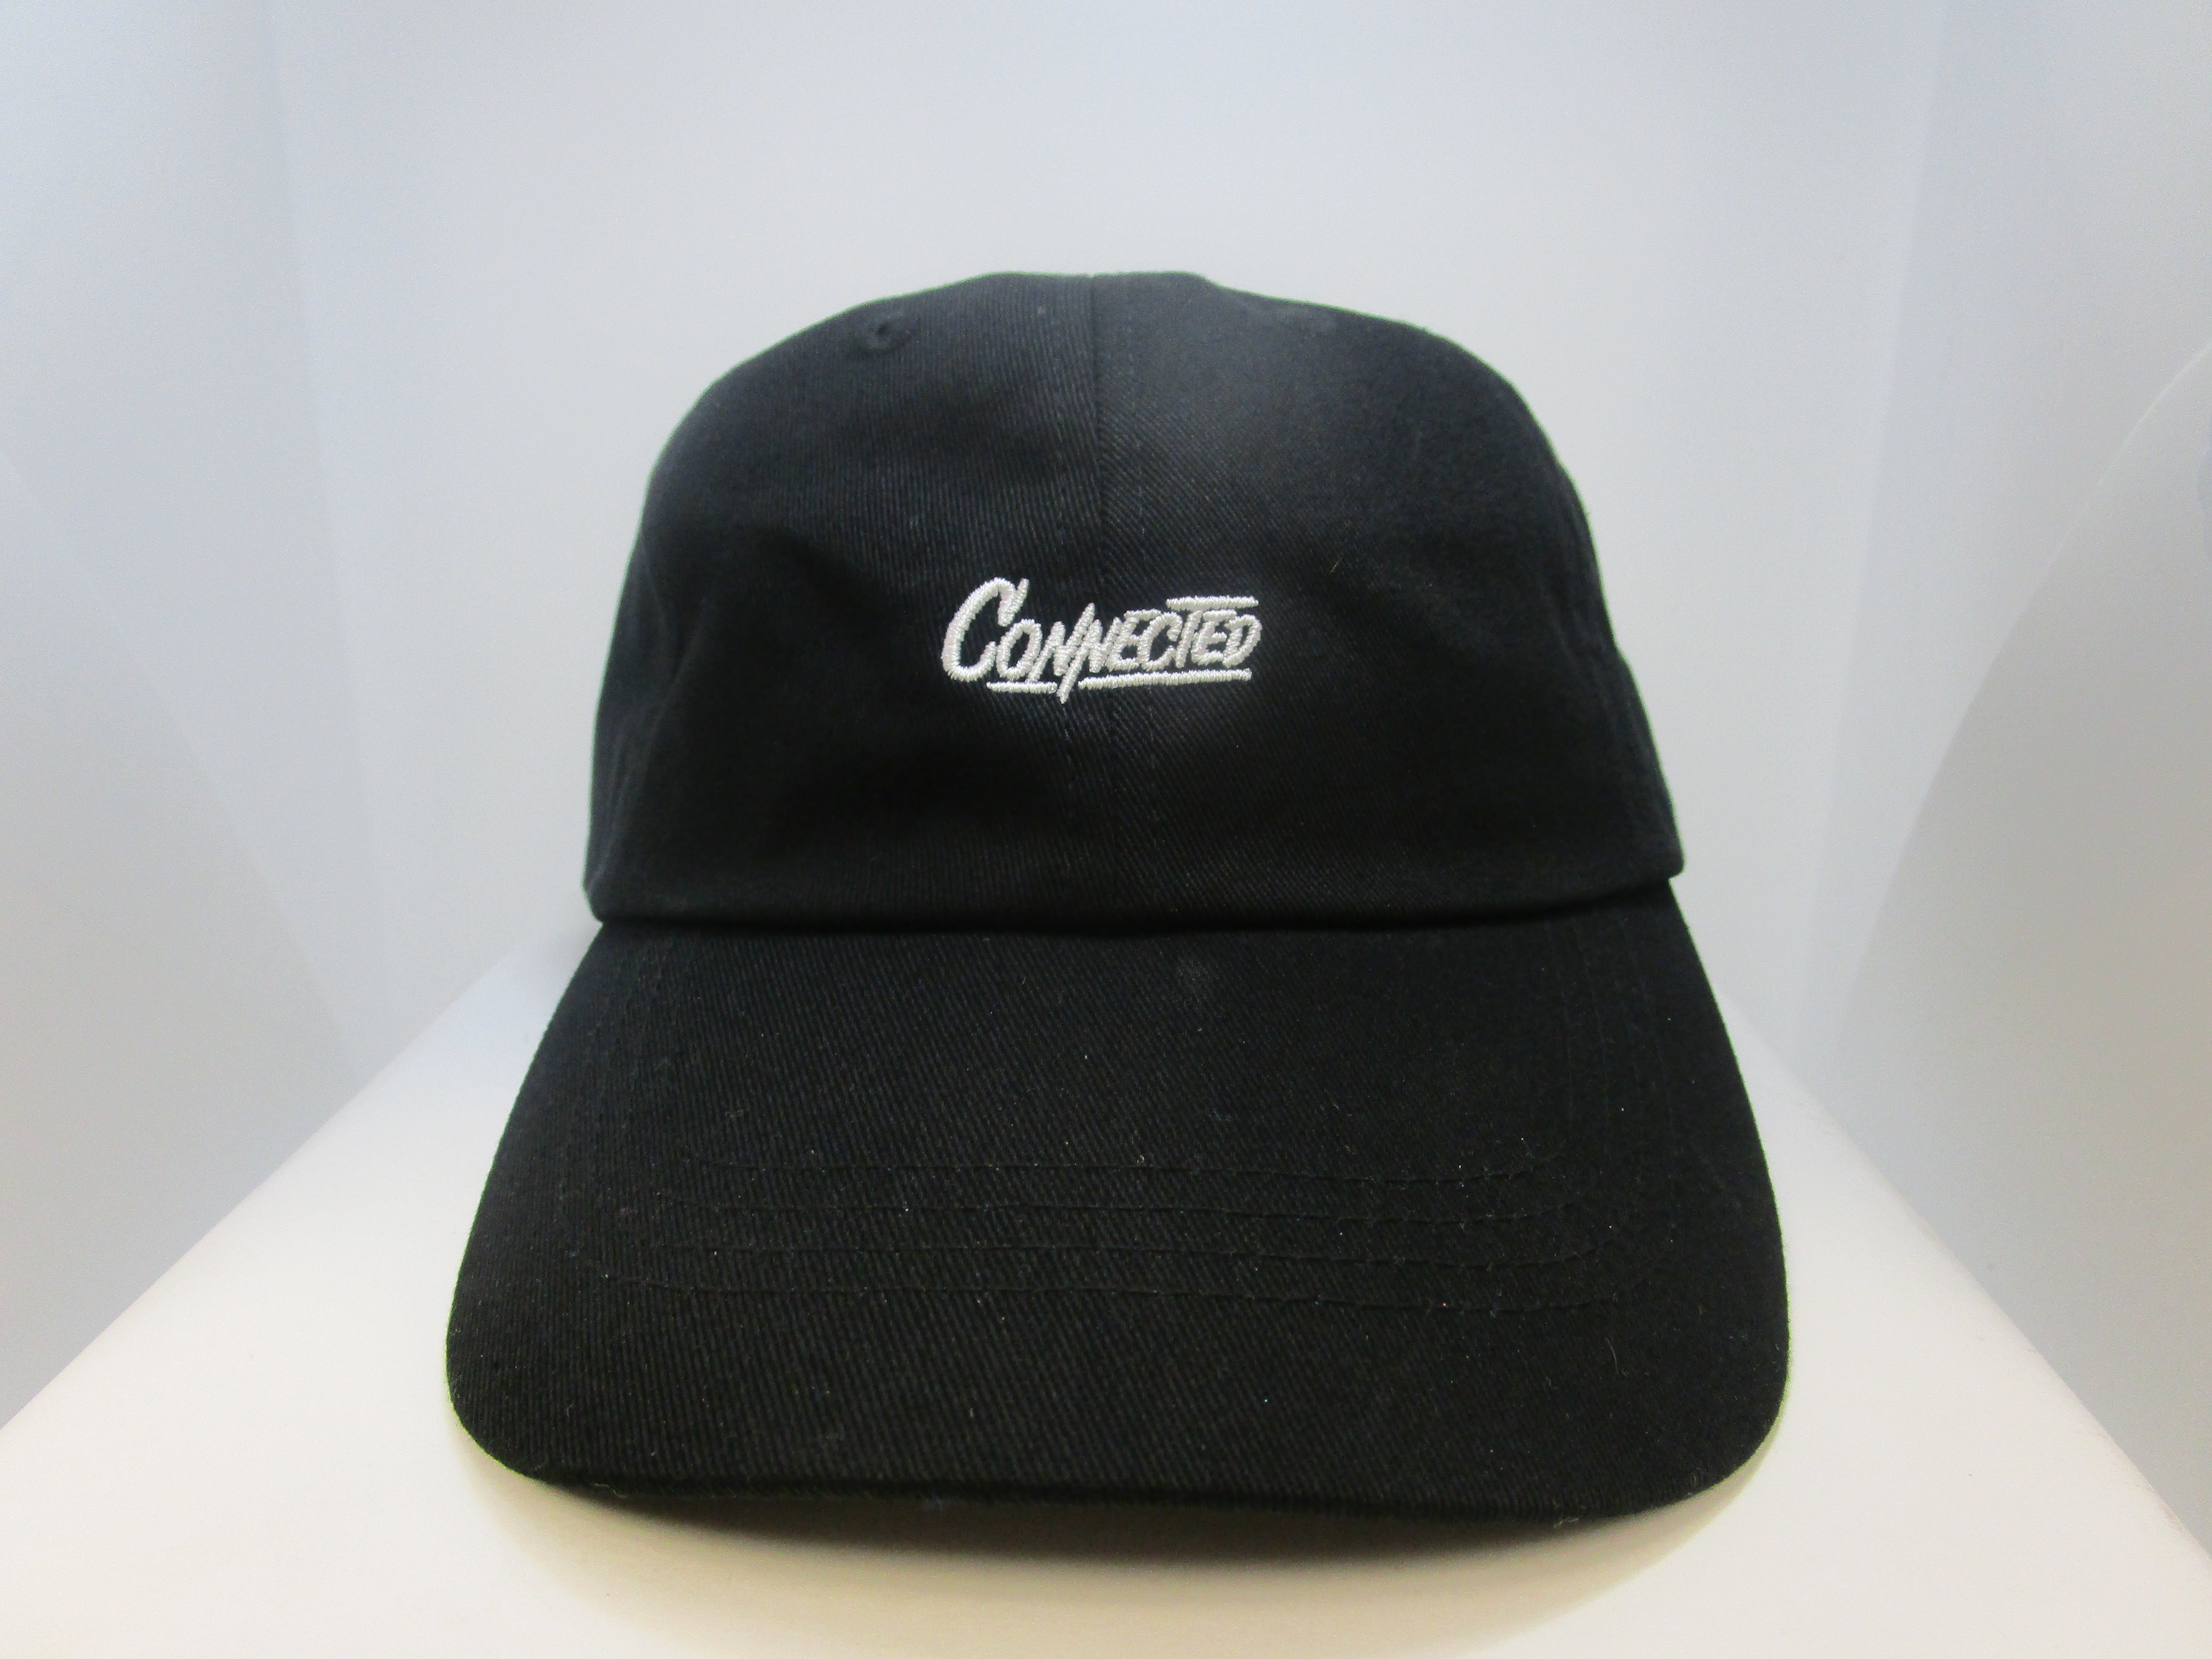 gear-connected-dad-hat-black-small-writing